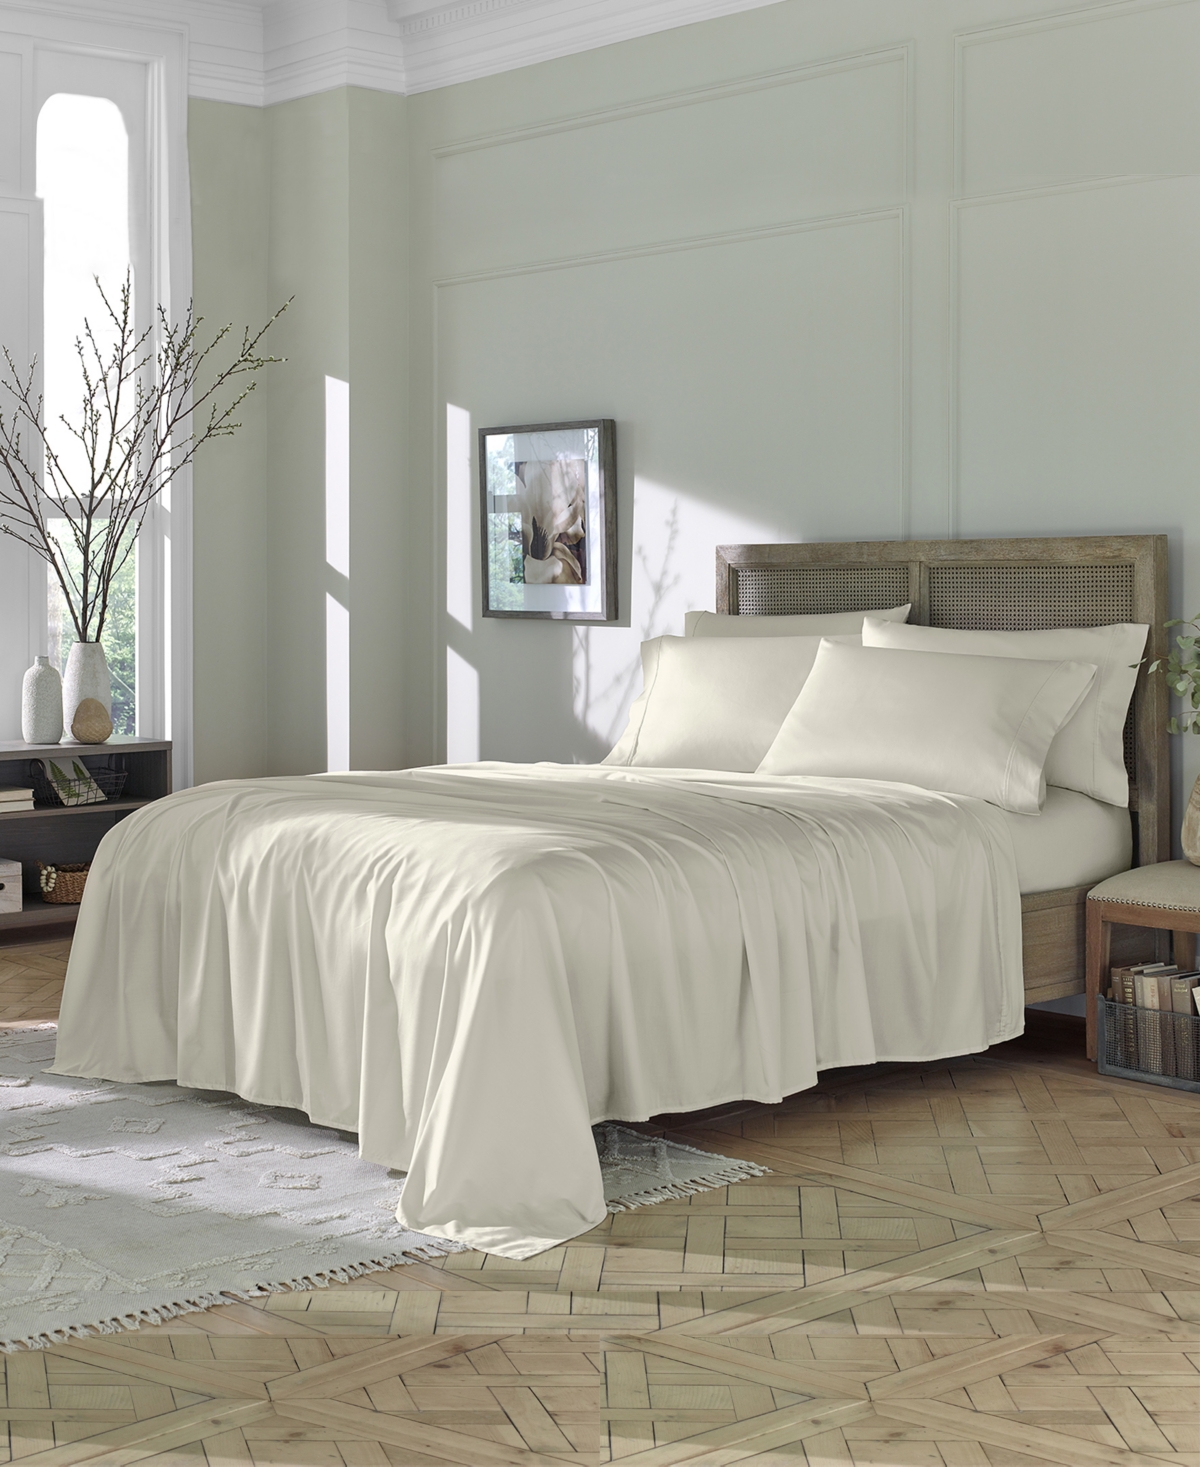 Shop Clara Clark Eucalyptus Unique Lyocell Blend Fabric Soft Natural And Durable, 6 Piece Sheet Set, Queen In Ivory